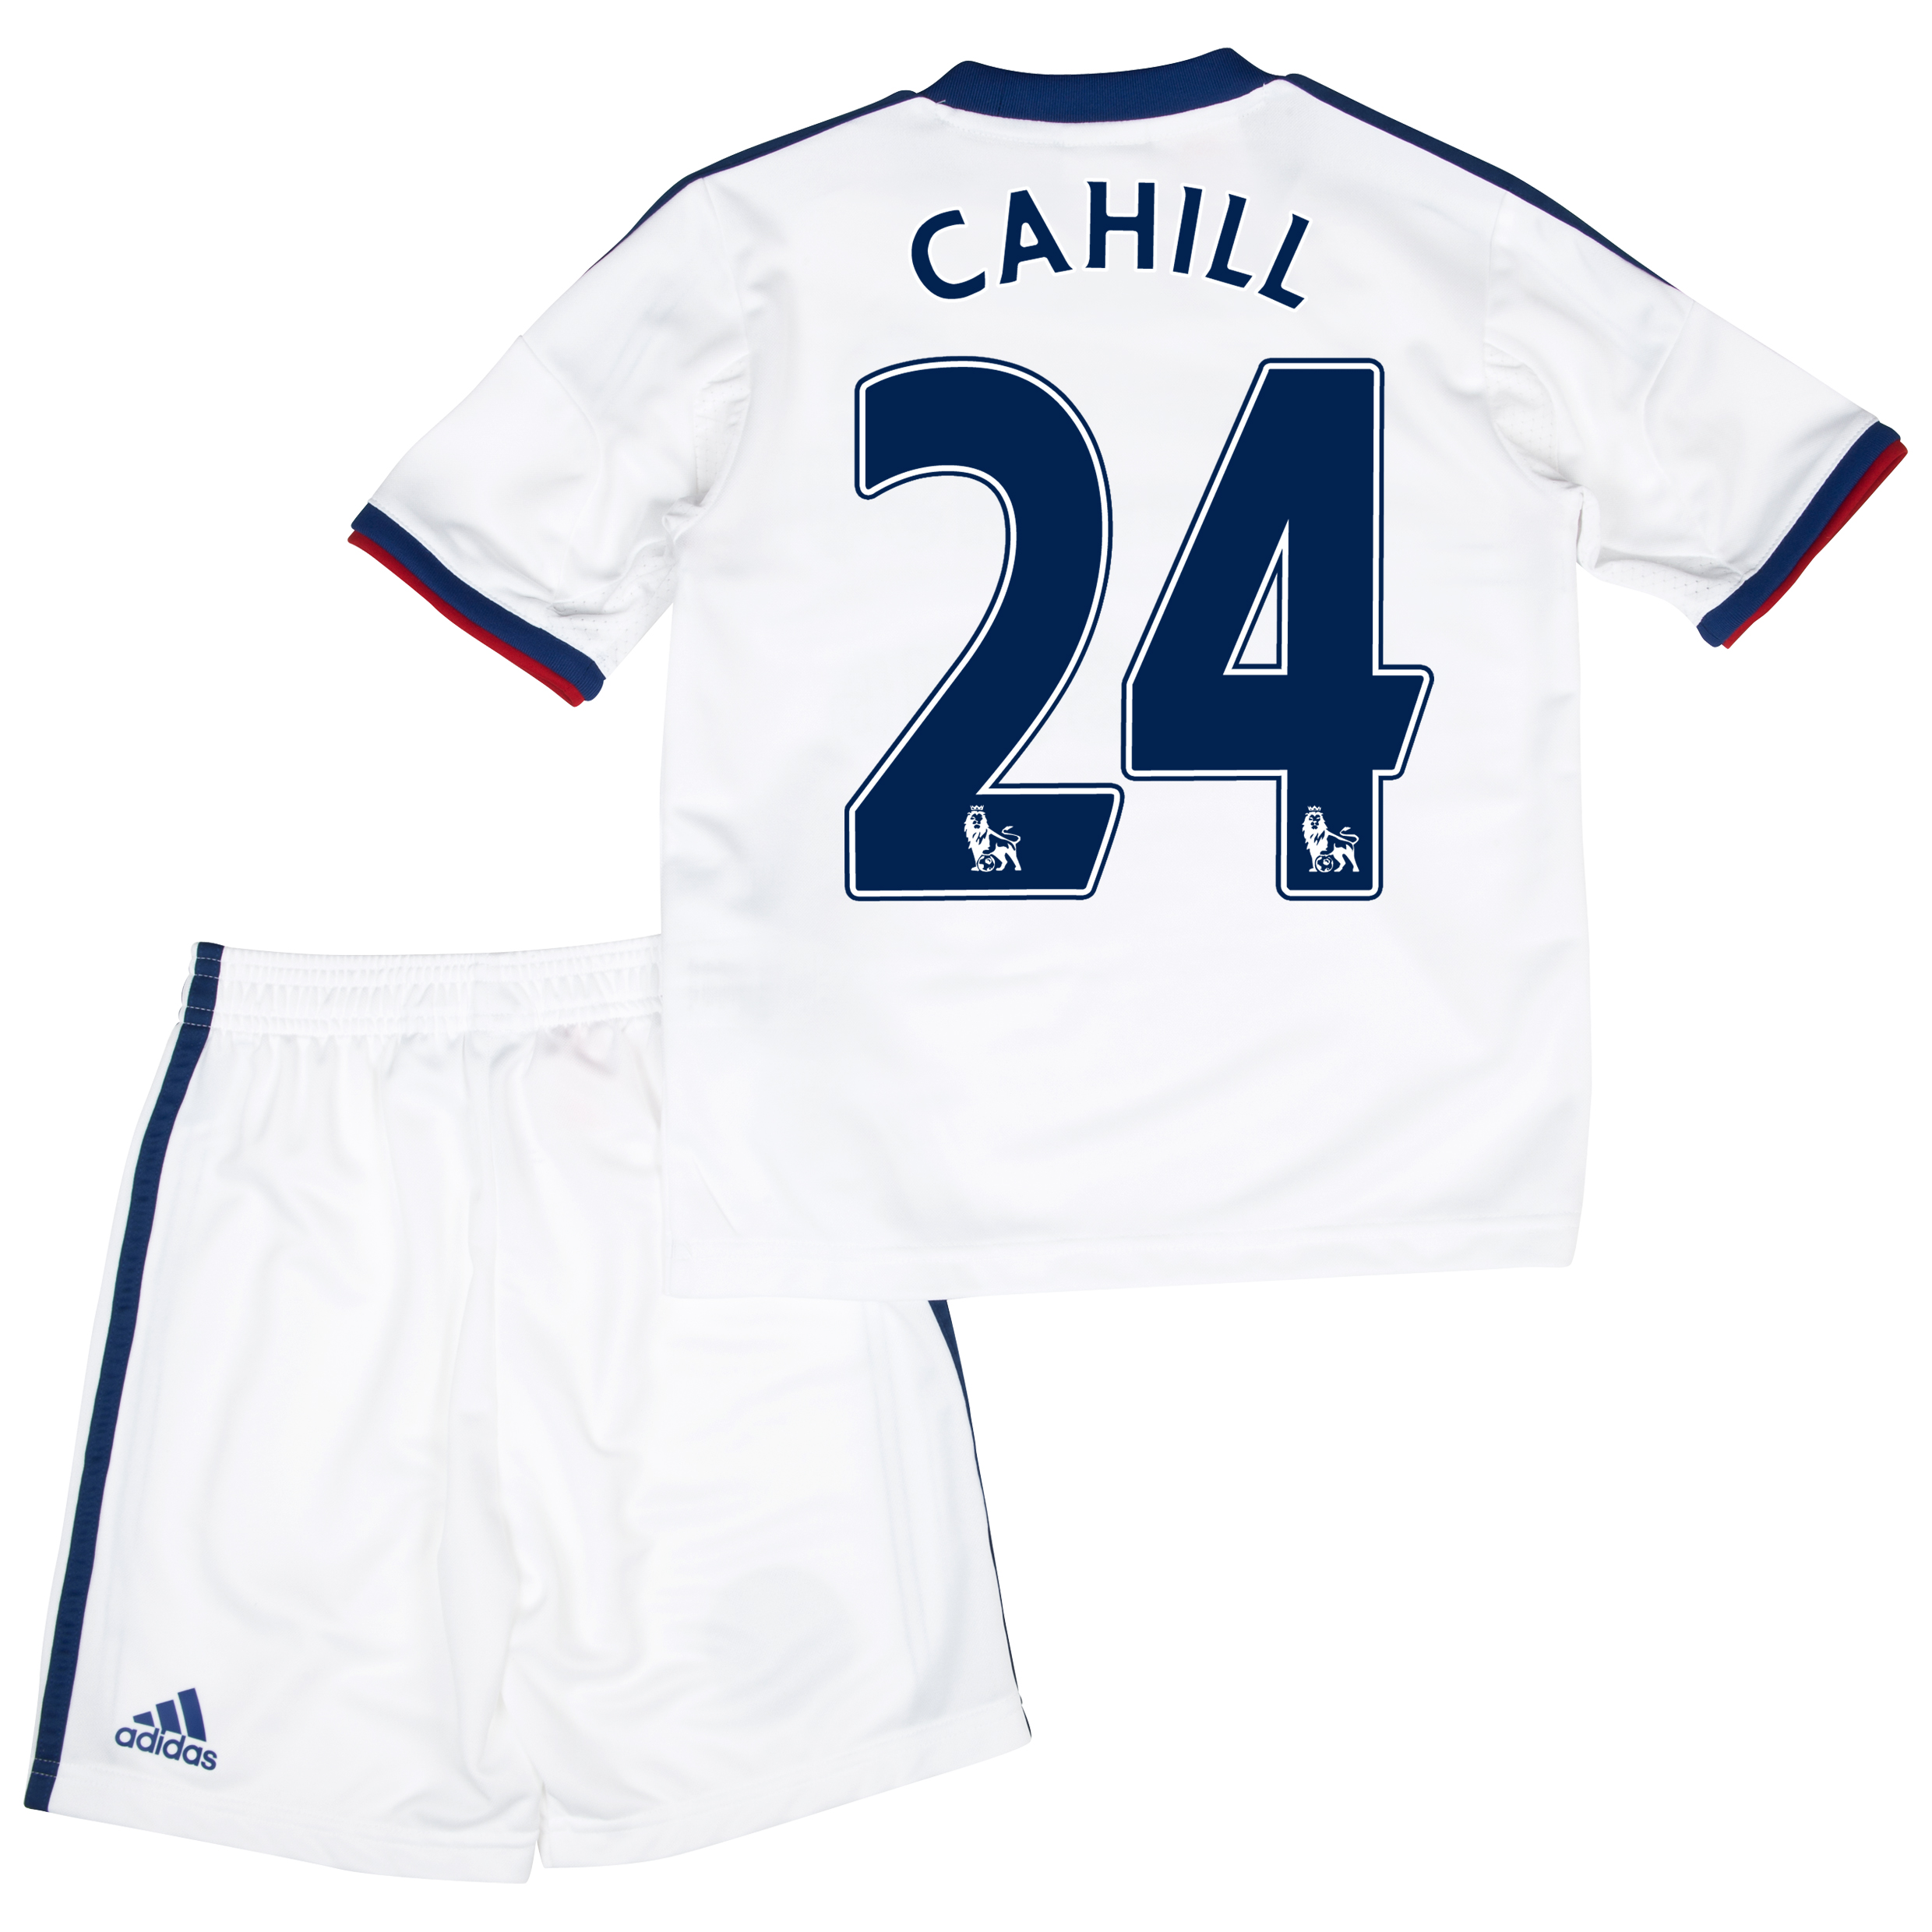 Chelsea Away Mini Kit 2013/14 with Cahill 24 printing